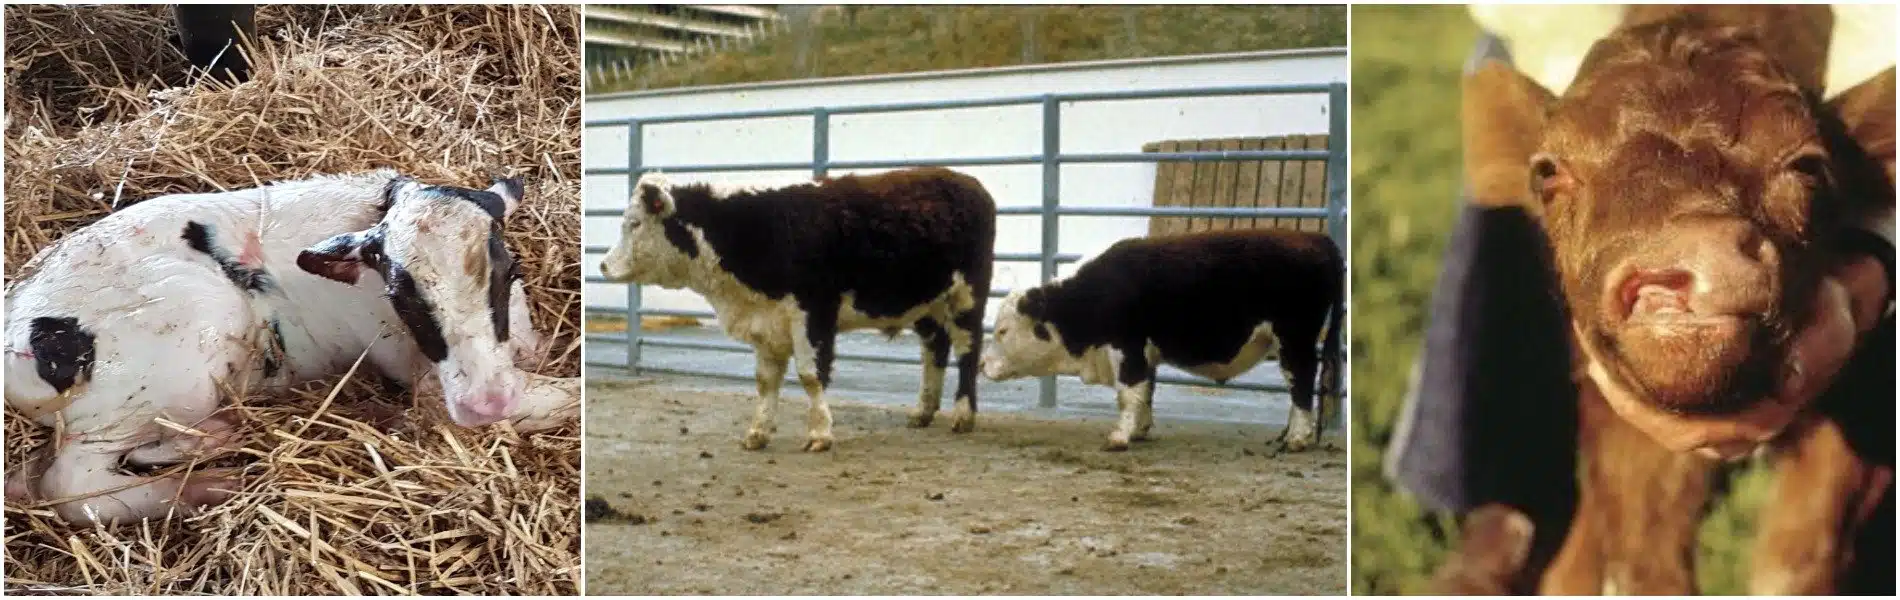 Common Birth Defects in Calves; Dwarfism, Taillessness And More